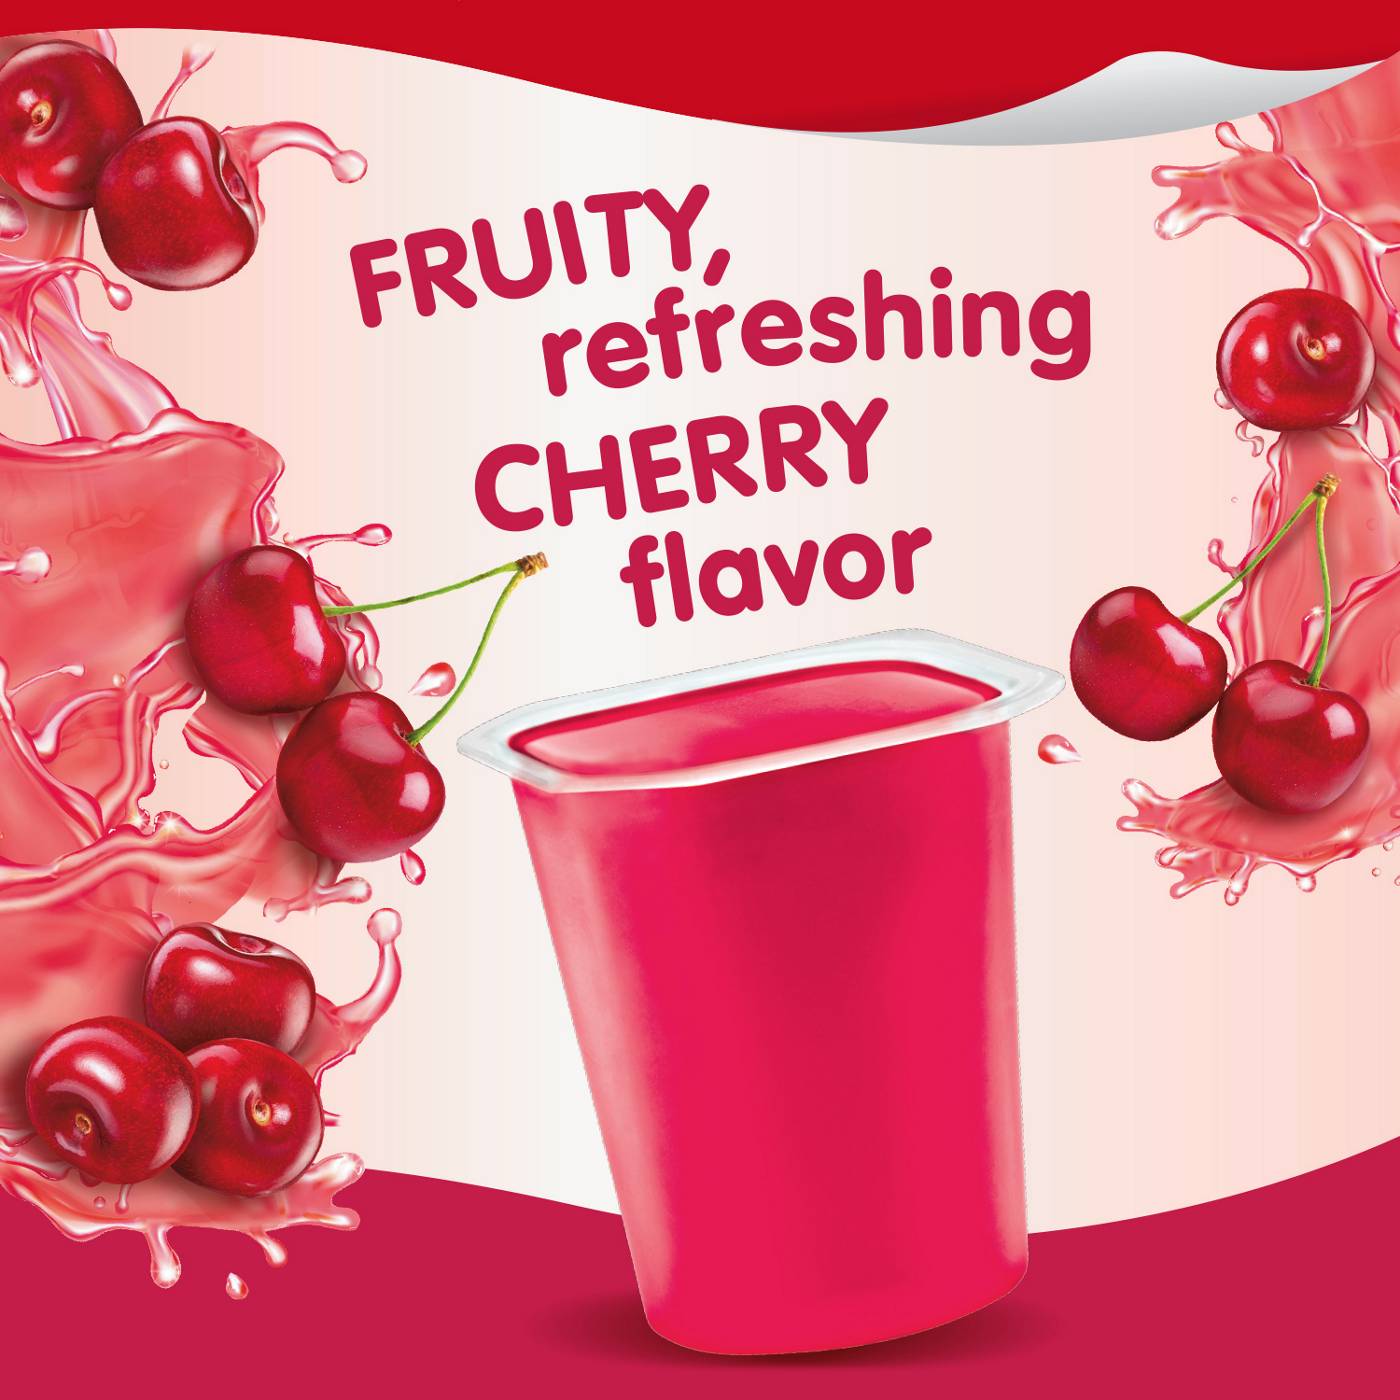 Snack Pack Sugar Free Cherry Juicy Gels Cups Shop Pudding And Gelatin At H E B